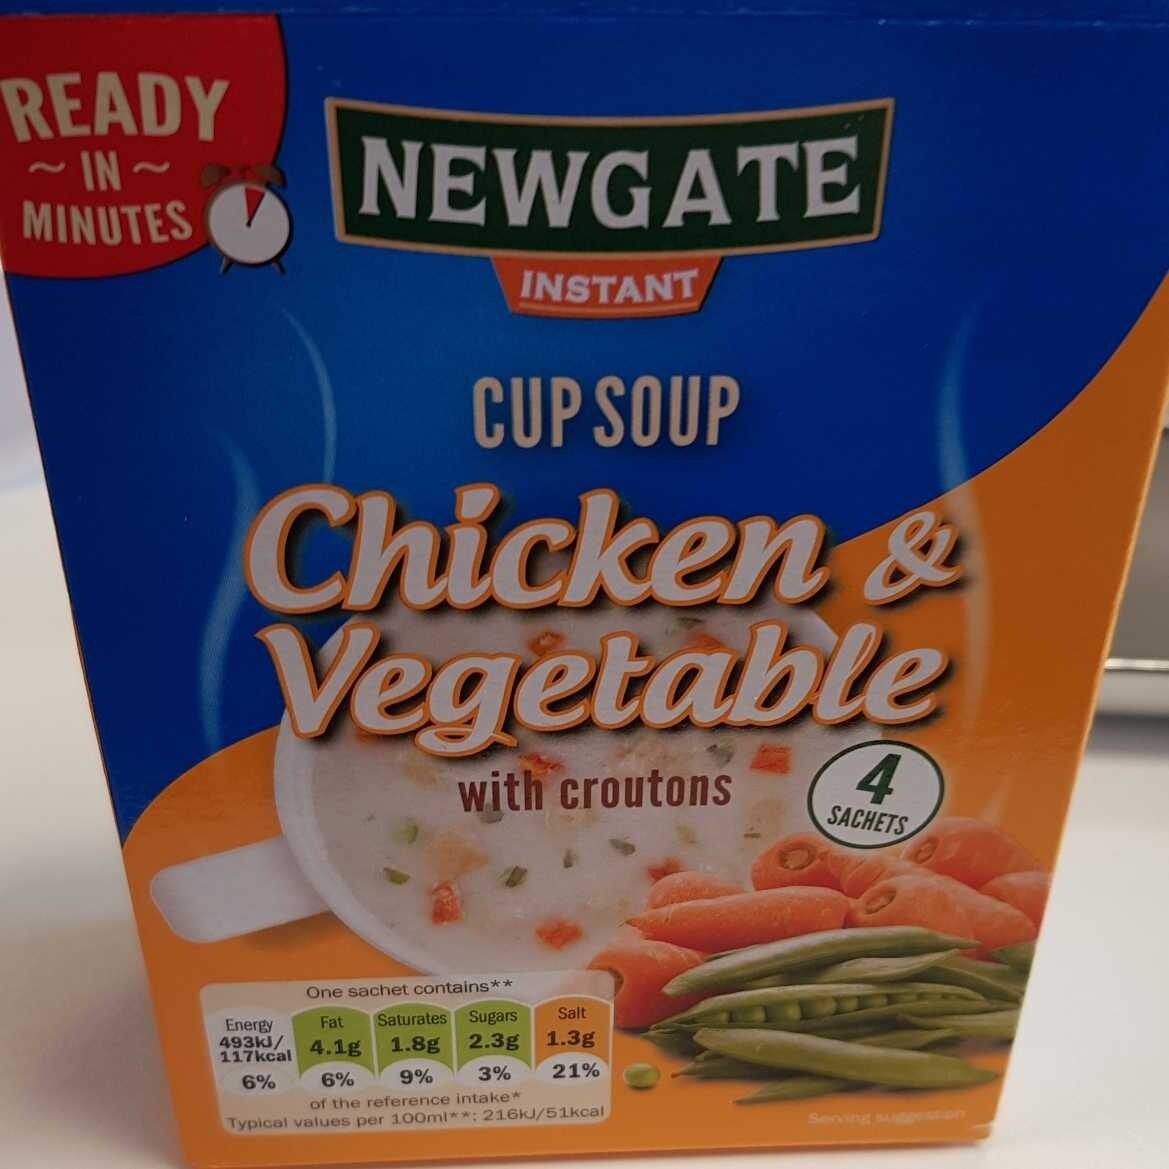 Cup soup chicken and vegetable - Product - en